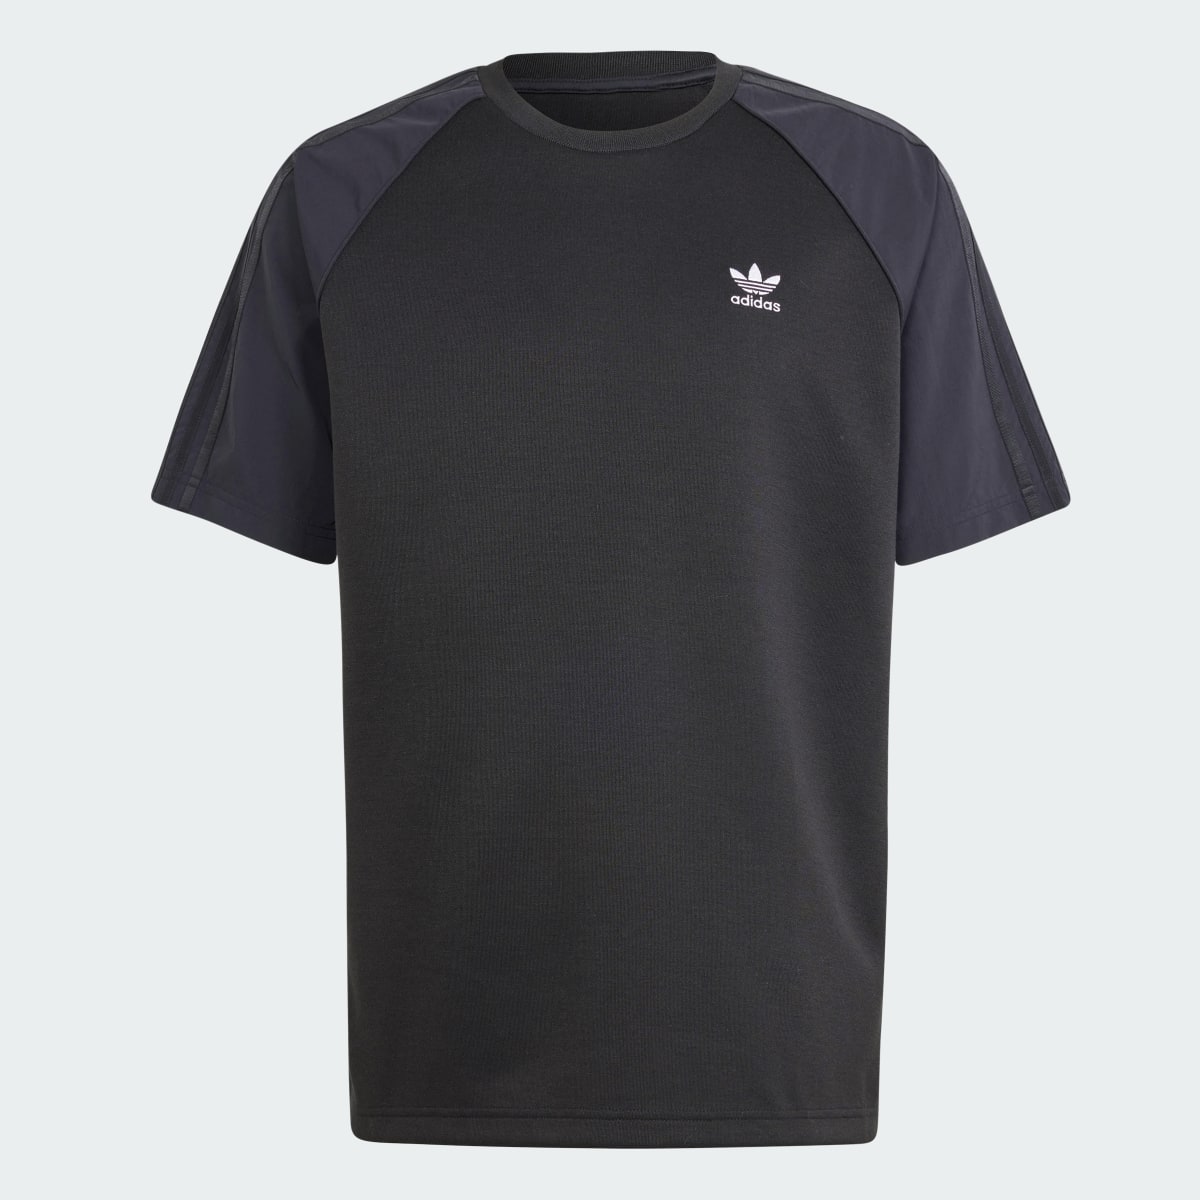 Adidas Adicolor Re-Pro SST Material Mix Tee. 5